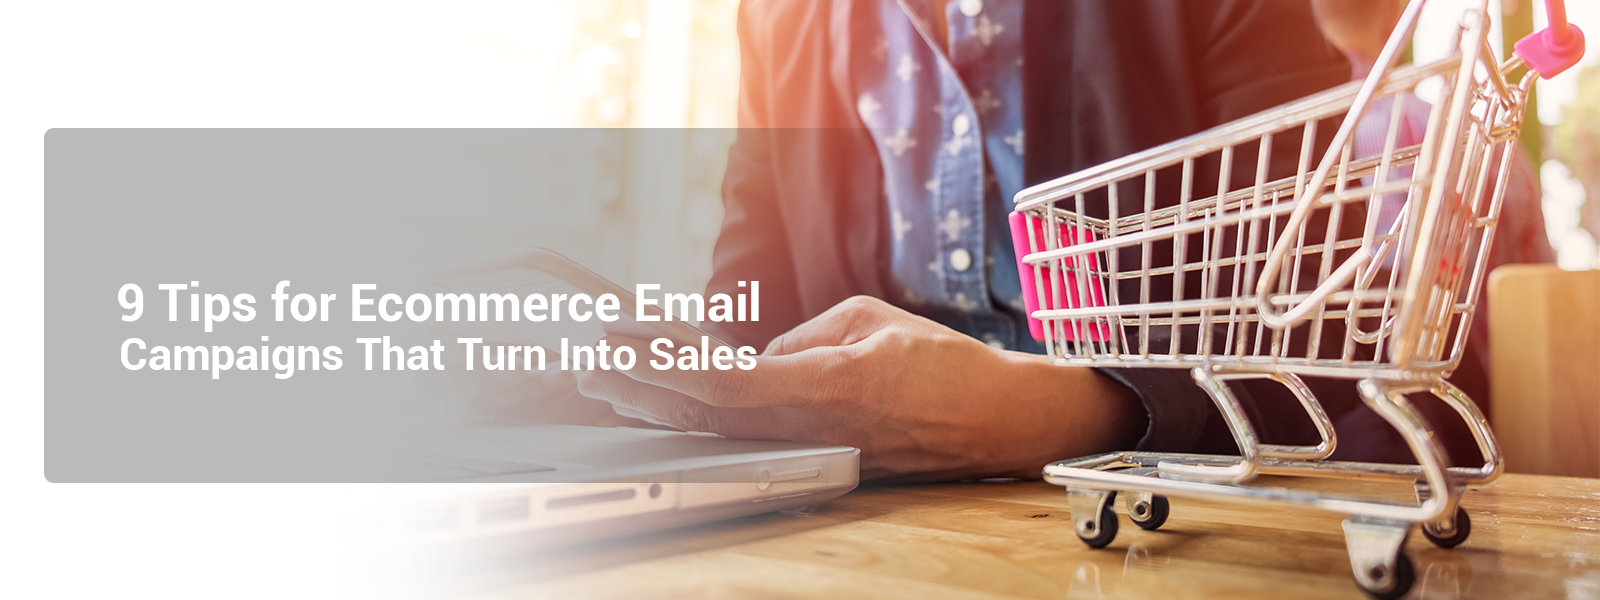 9 tips for ecommerce email campaigns that turn into sales